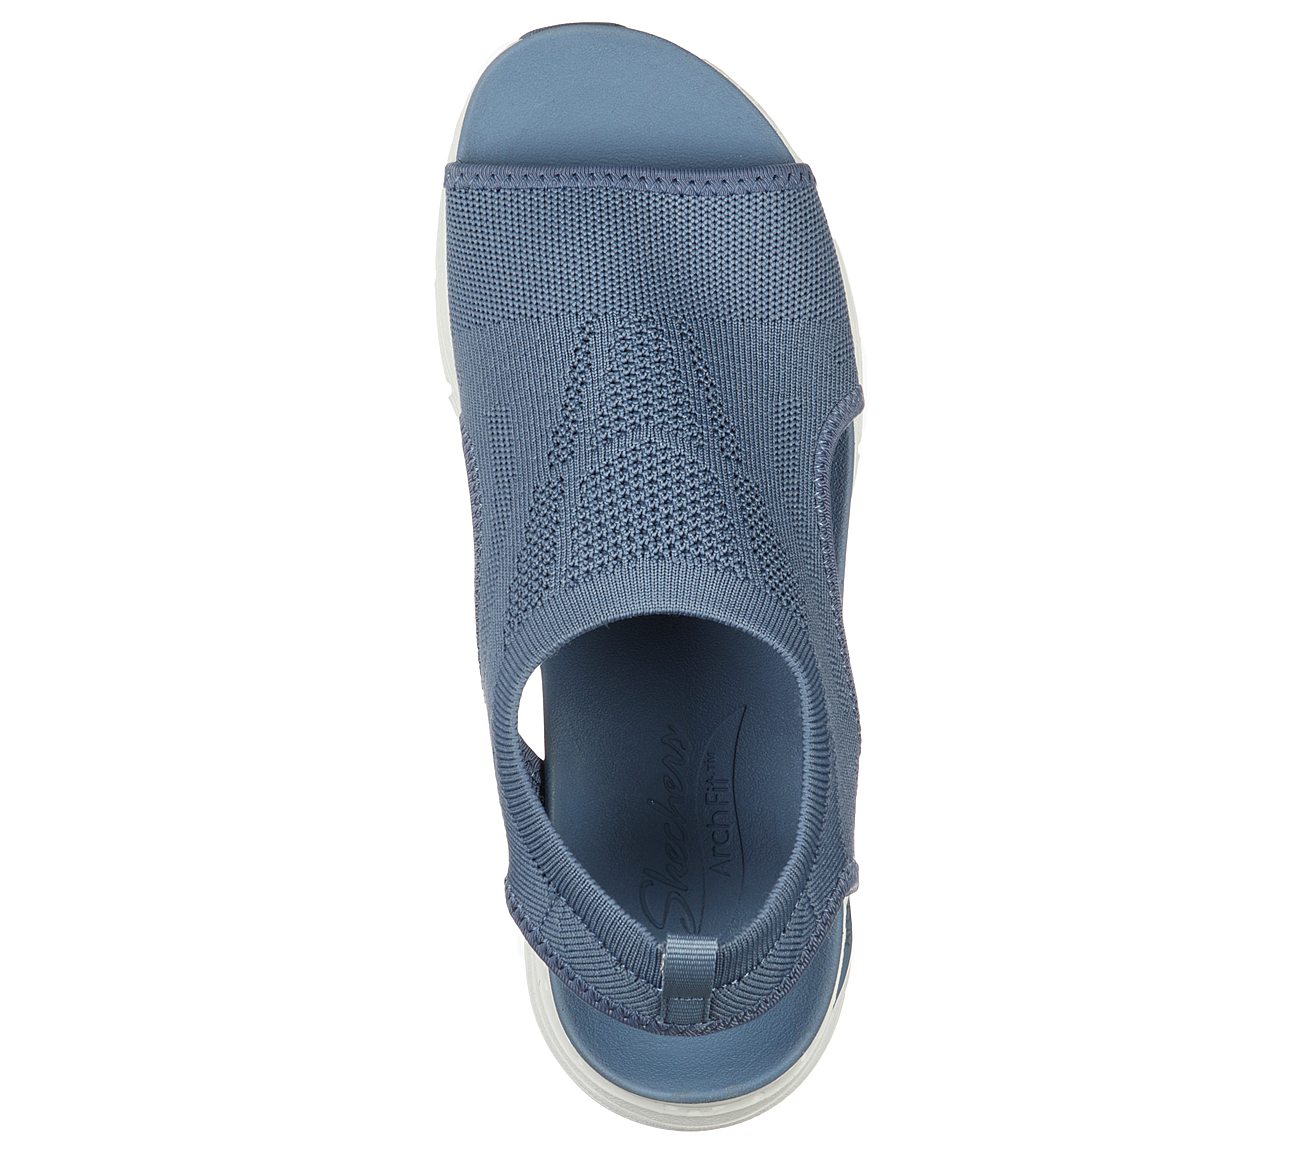 ARCH FIT-CITY CATCH, SLATE Footwear Top View